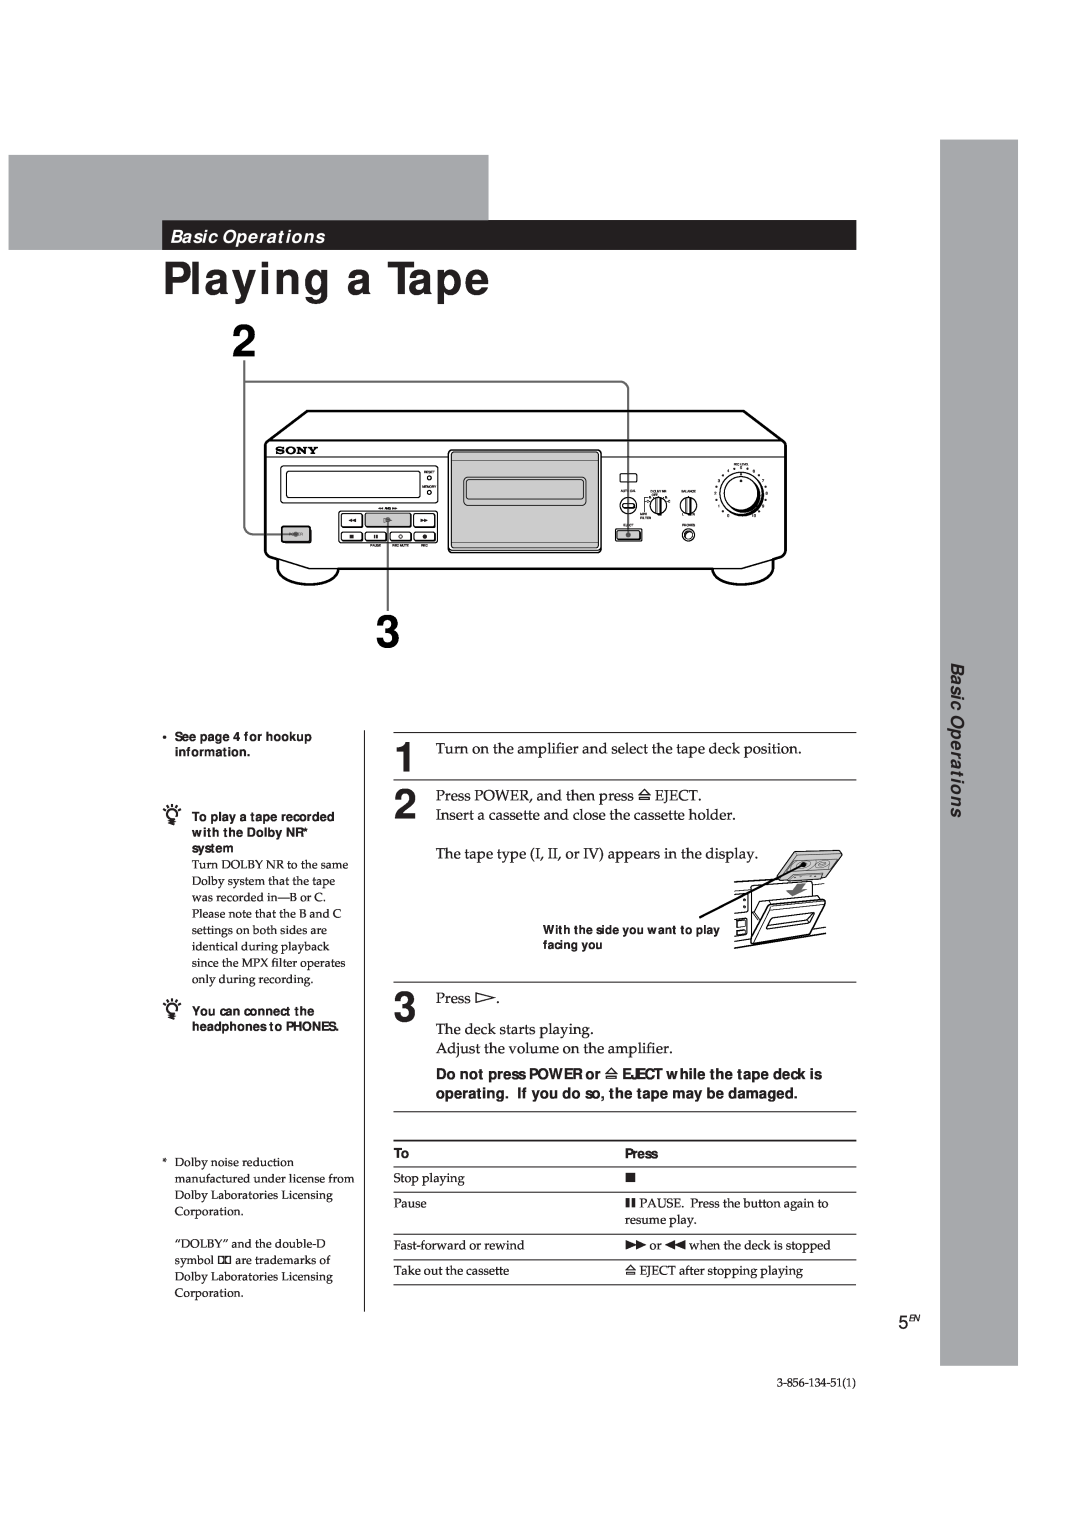 Sony TC-KE300 operating instructions Playing a Tape, Basic Operations, Press, See page 4 for hookup information 